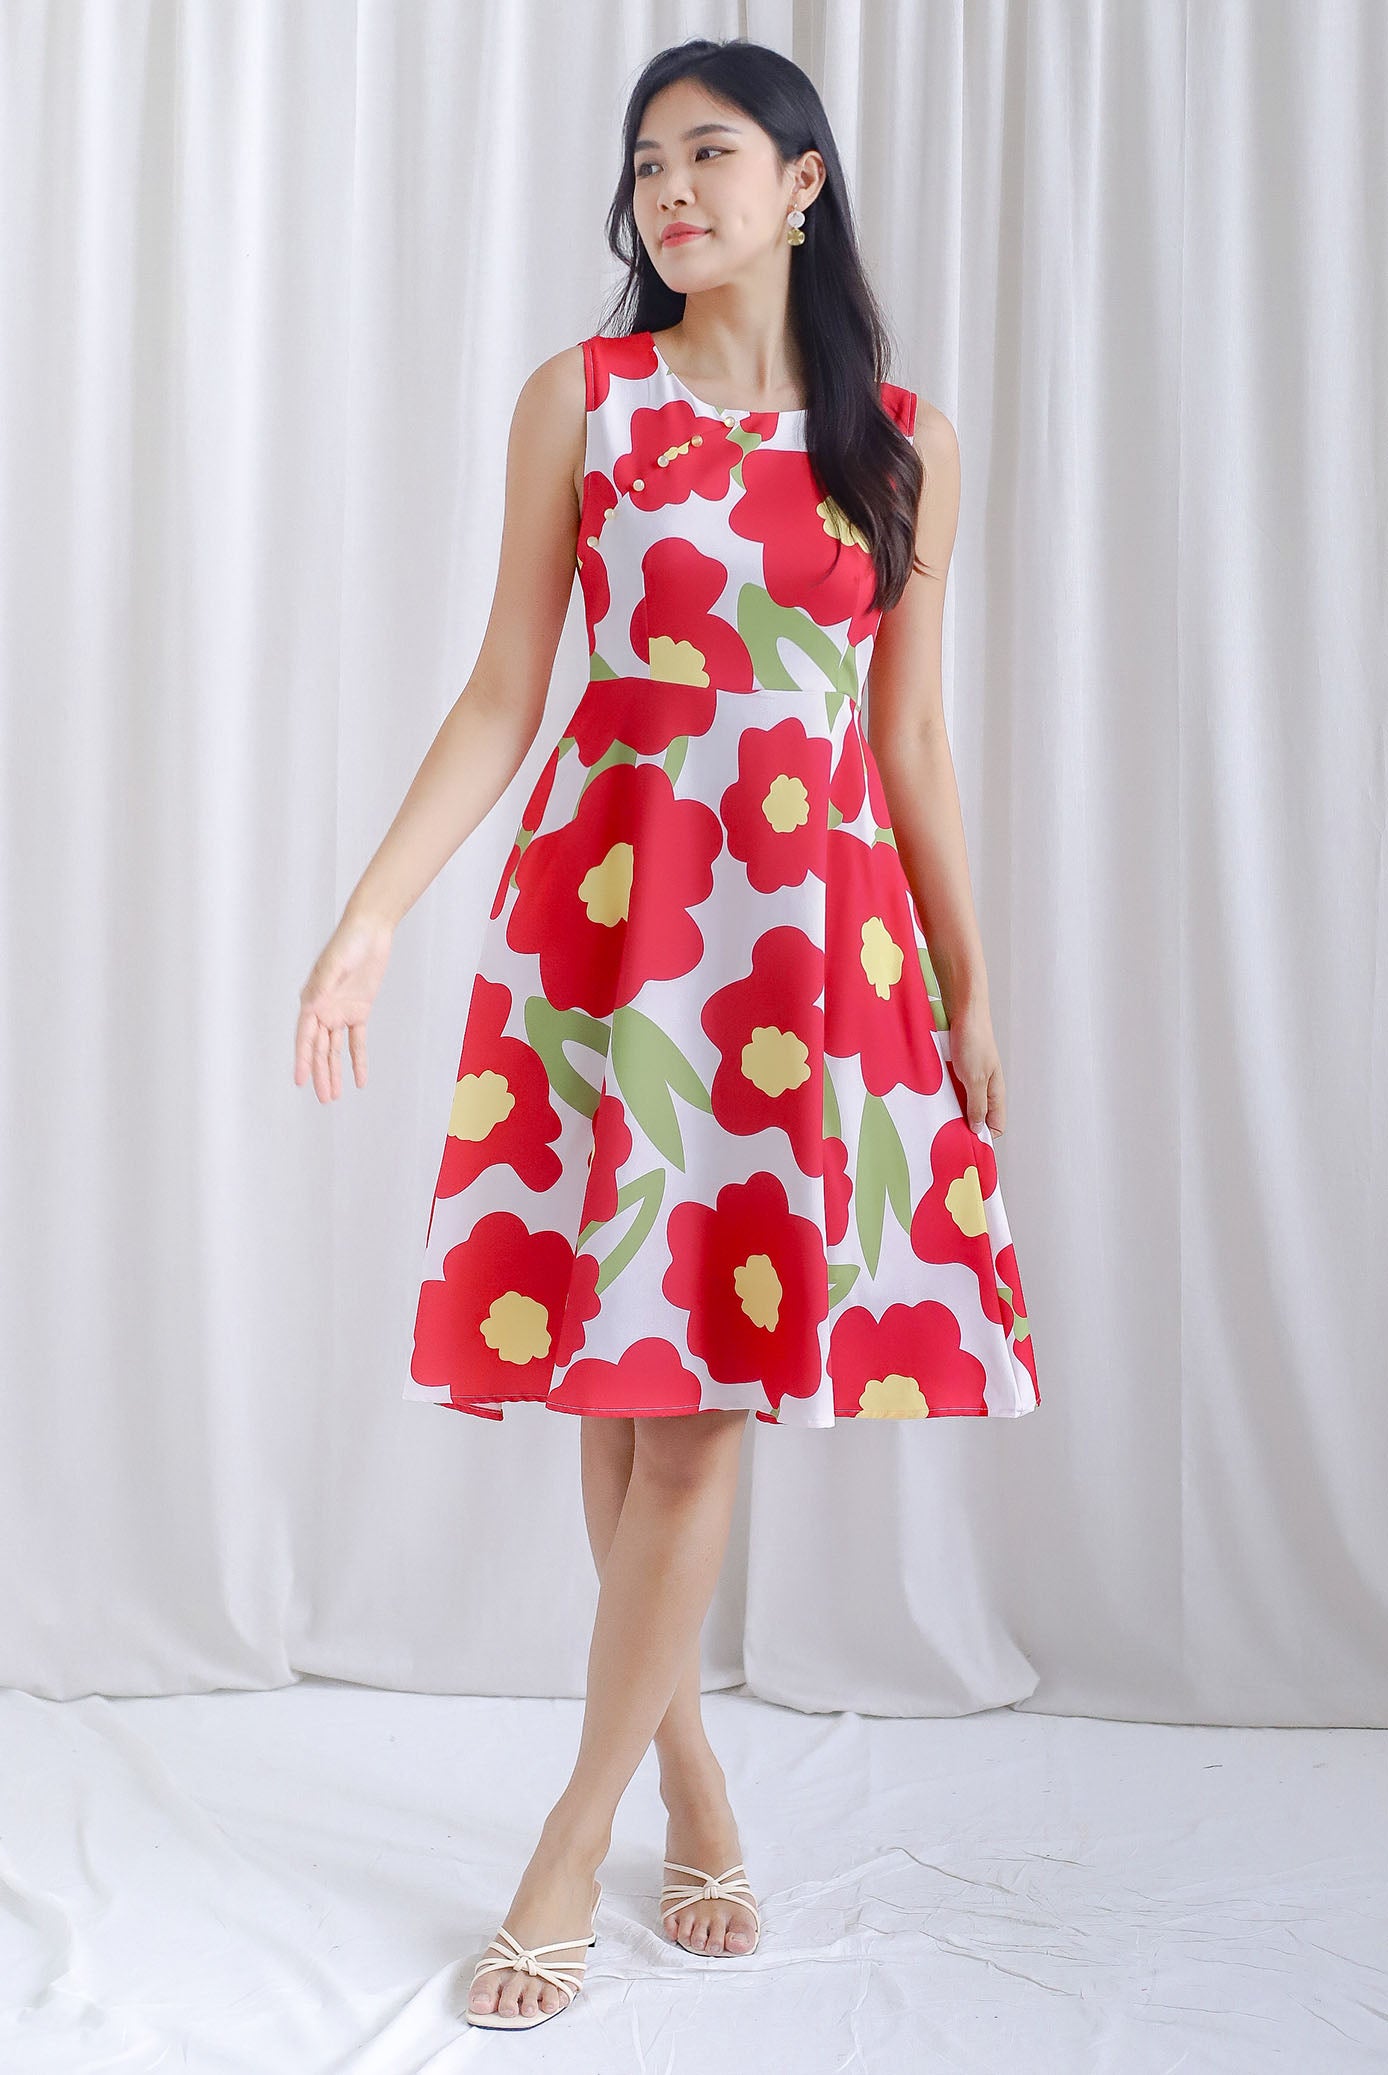 Jennett Oriental Pearl Buttons Floral Dress In Red